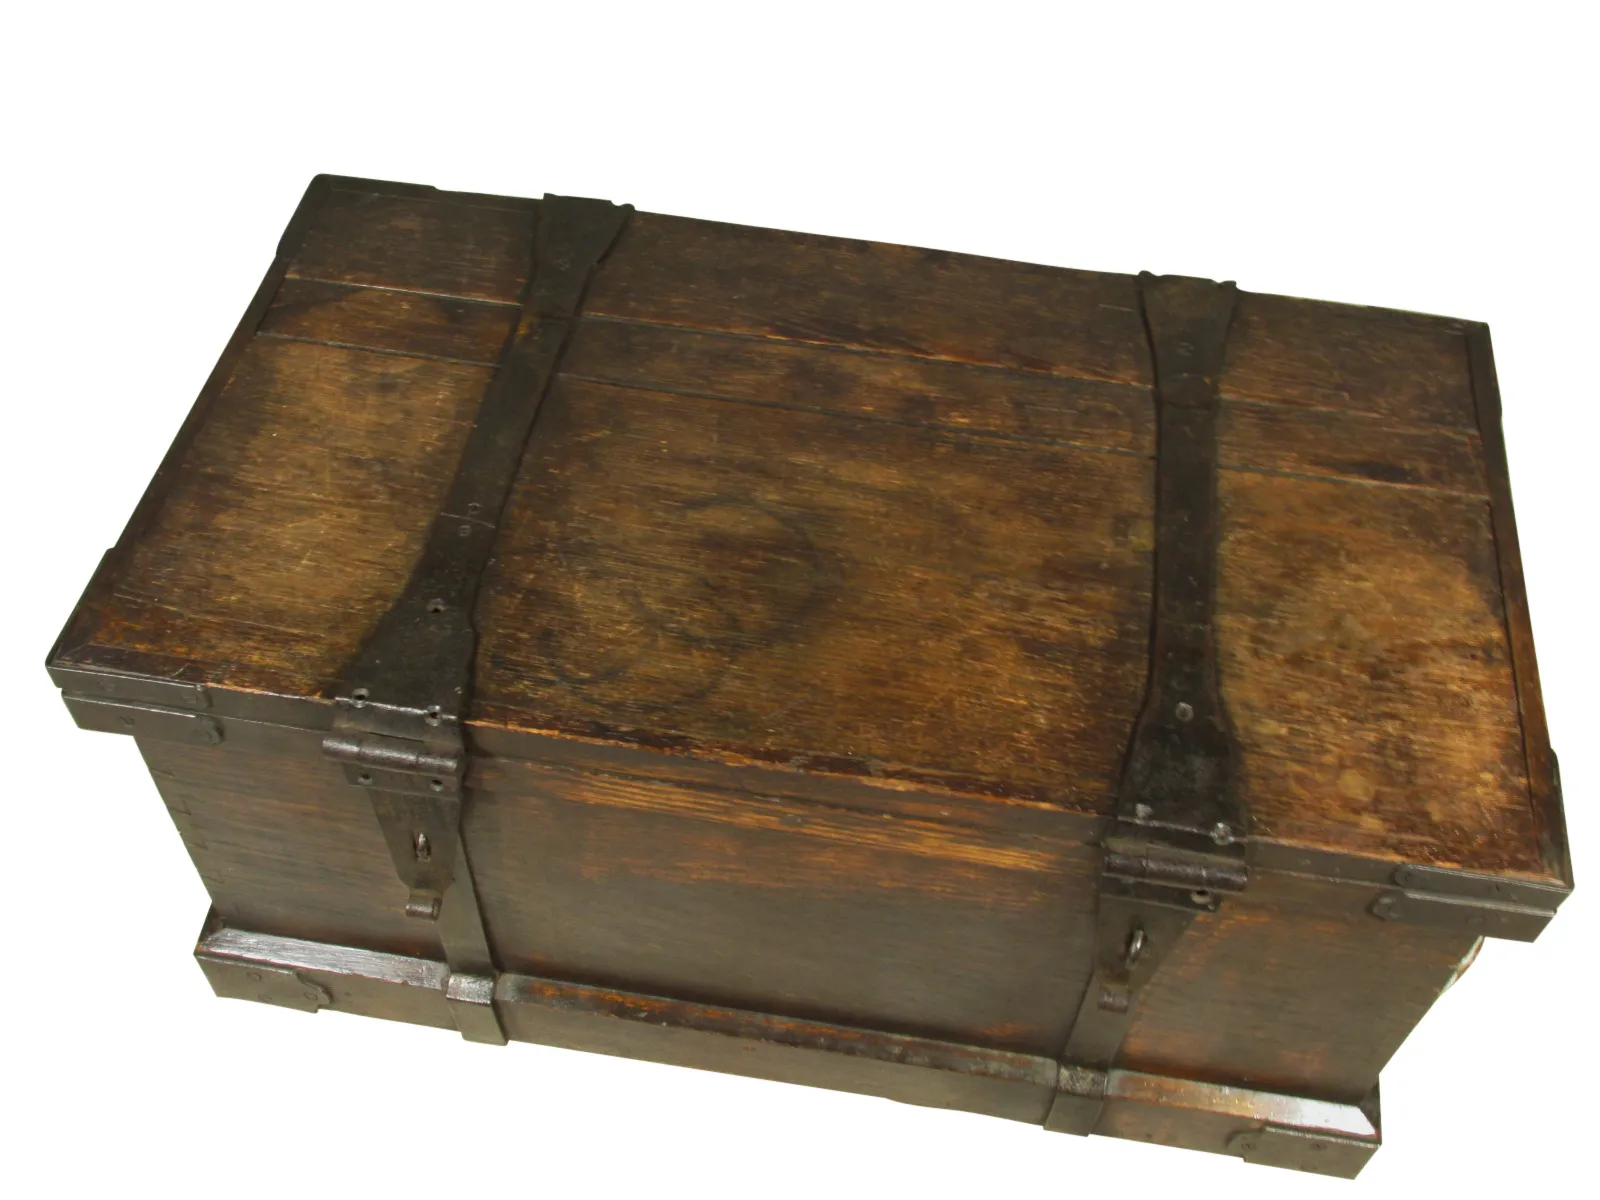 Continental Iron Bound Cash Box - The Barn at 17 Antiques - Brown